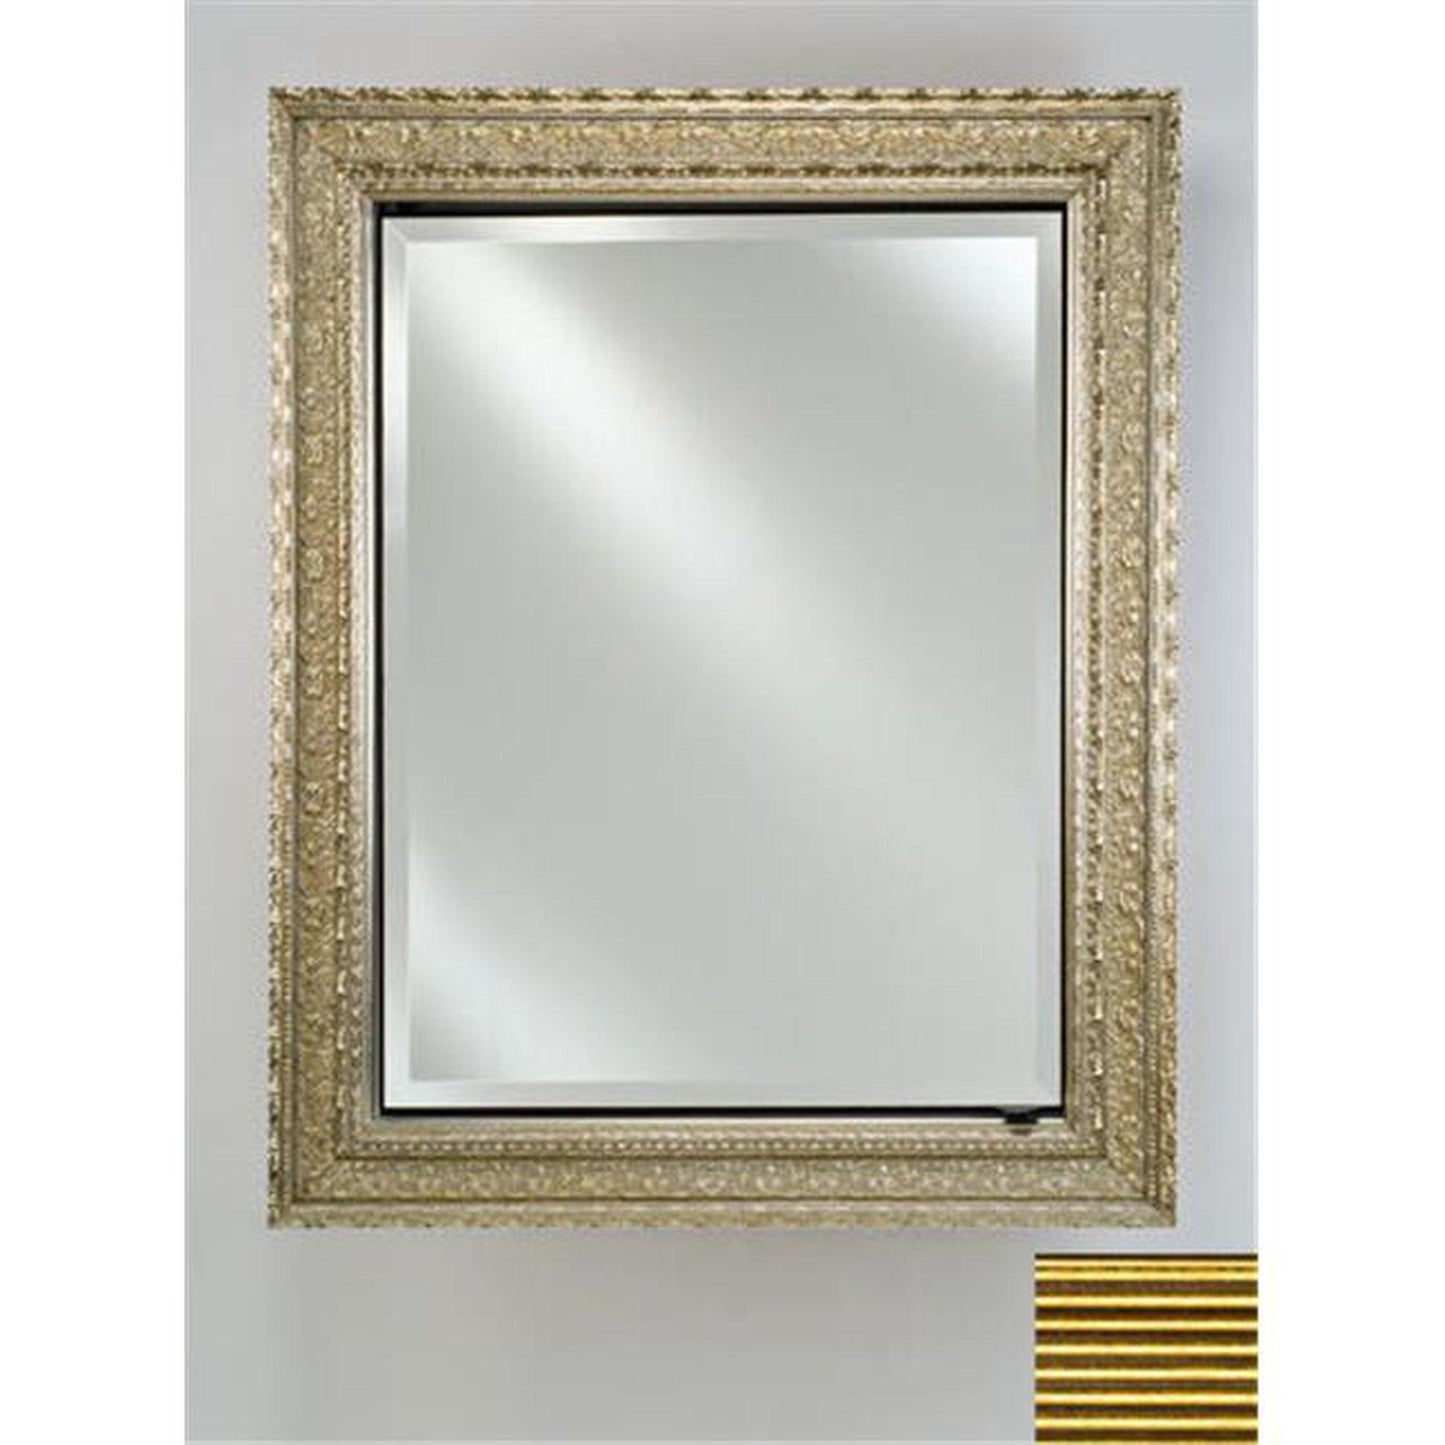 Afina Signature 17" x 26" Meridian Antique Gold With Antique Silver Caps Recessed Reversible Hinged Single Door Medicine Cabinet With Beveled Edge Mirror